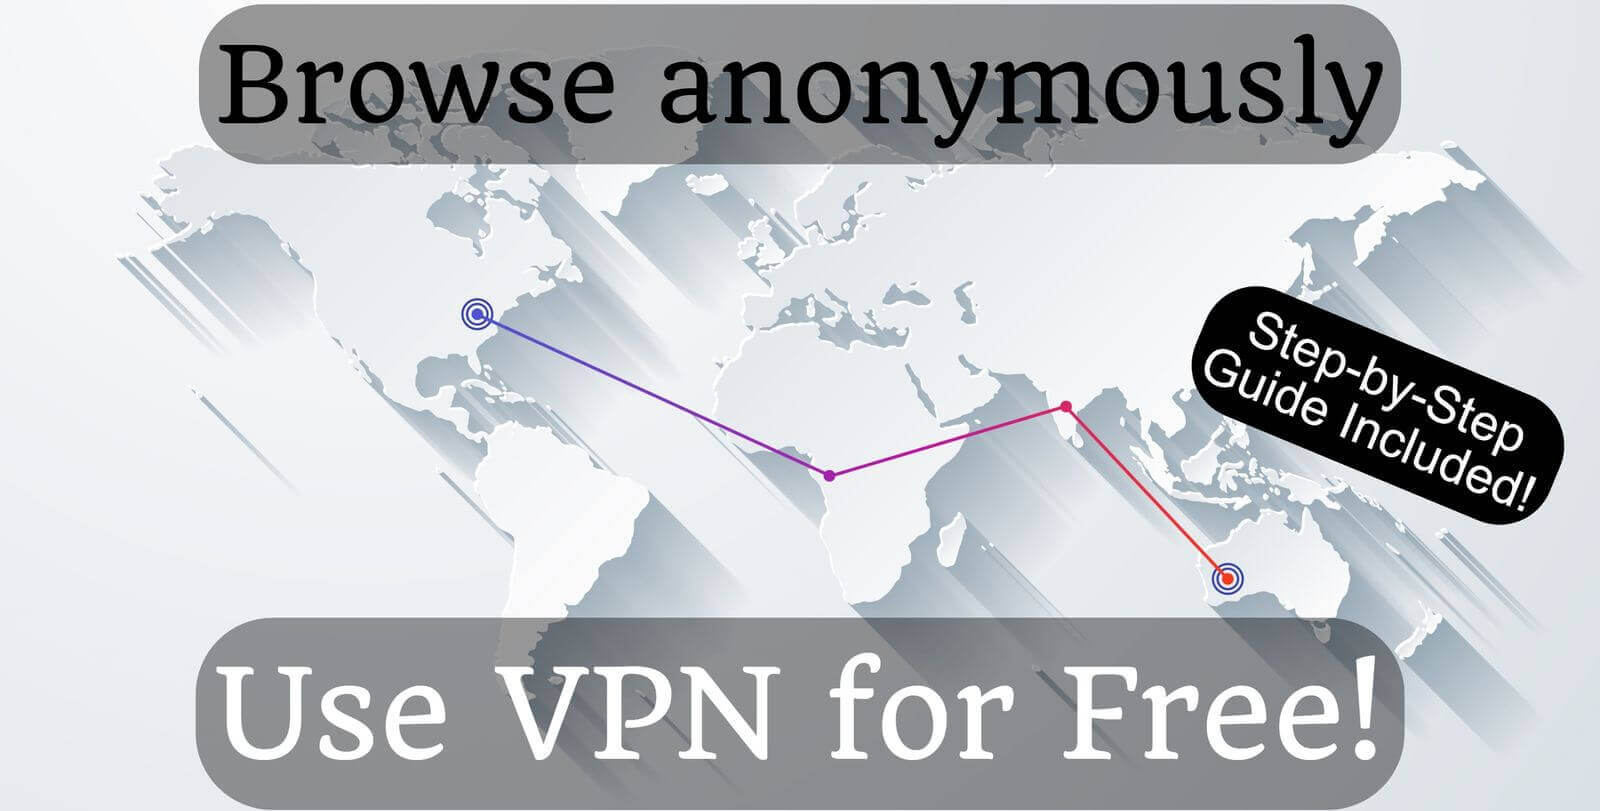 Browse anonymously: Use VPN for Free! (Step-by-Step Guide)